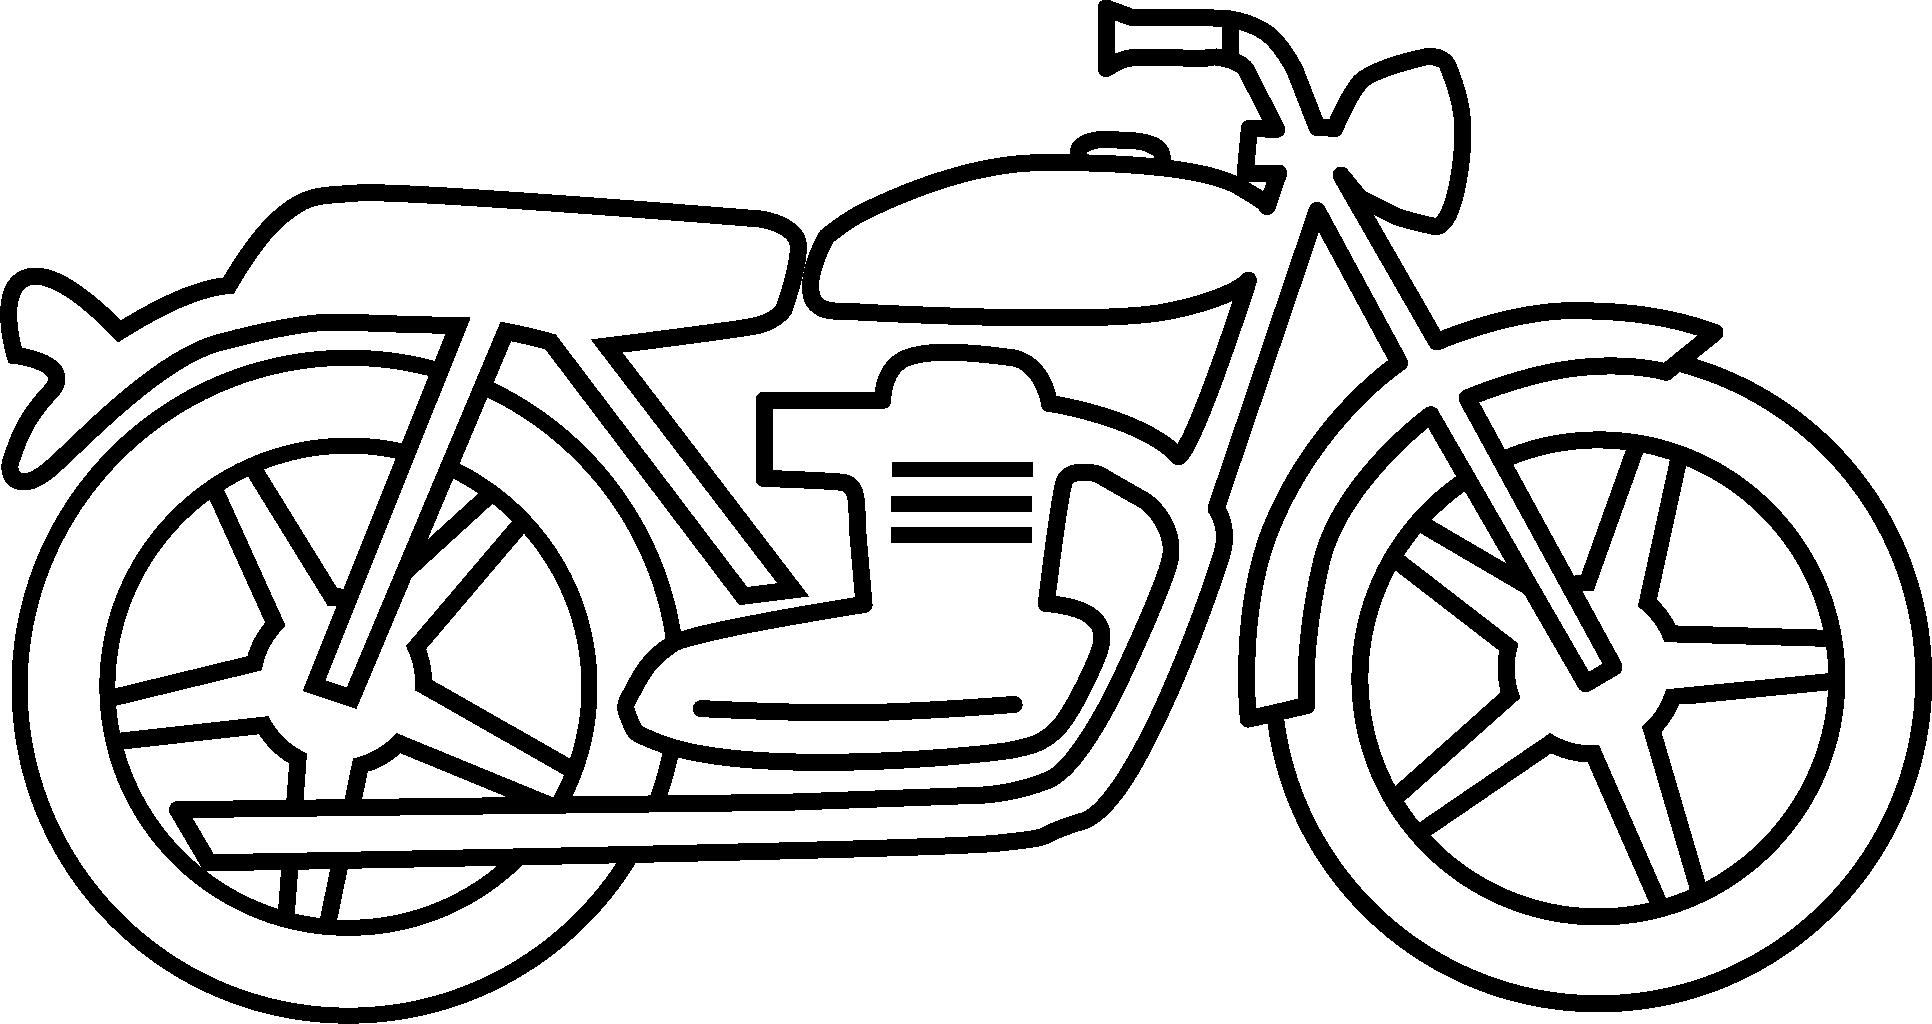 Motorcycle  black and white motorcycle clipart black and white simple clip art library